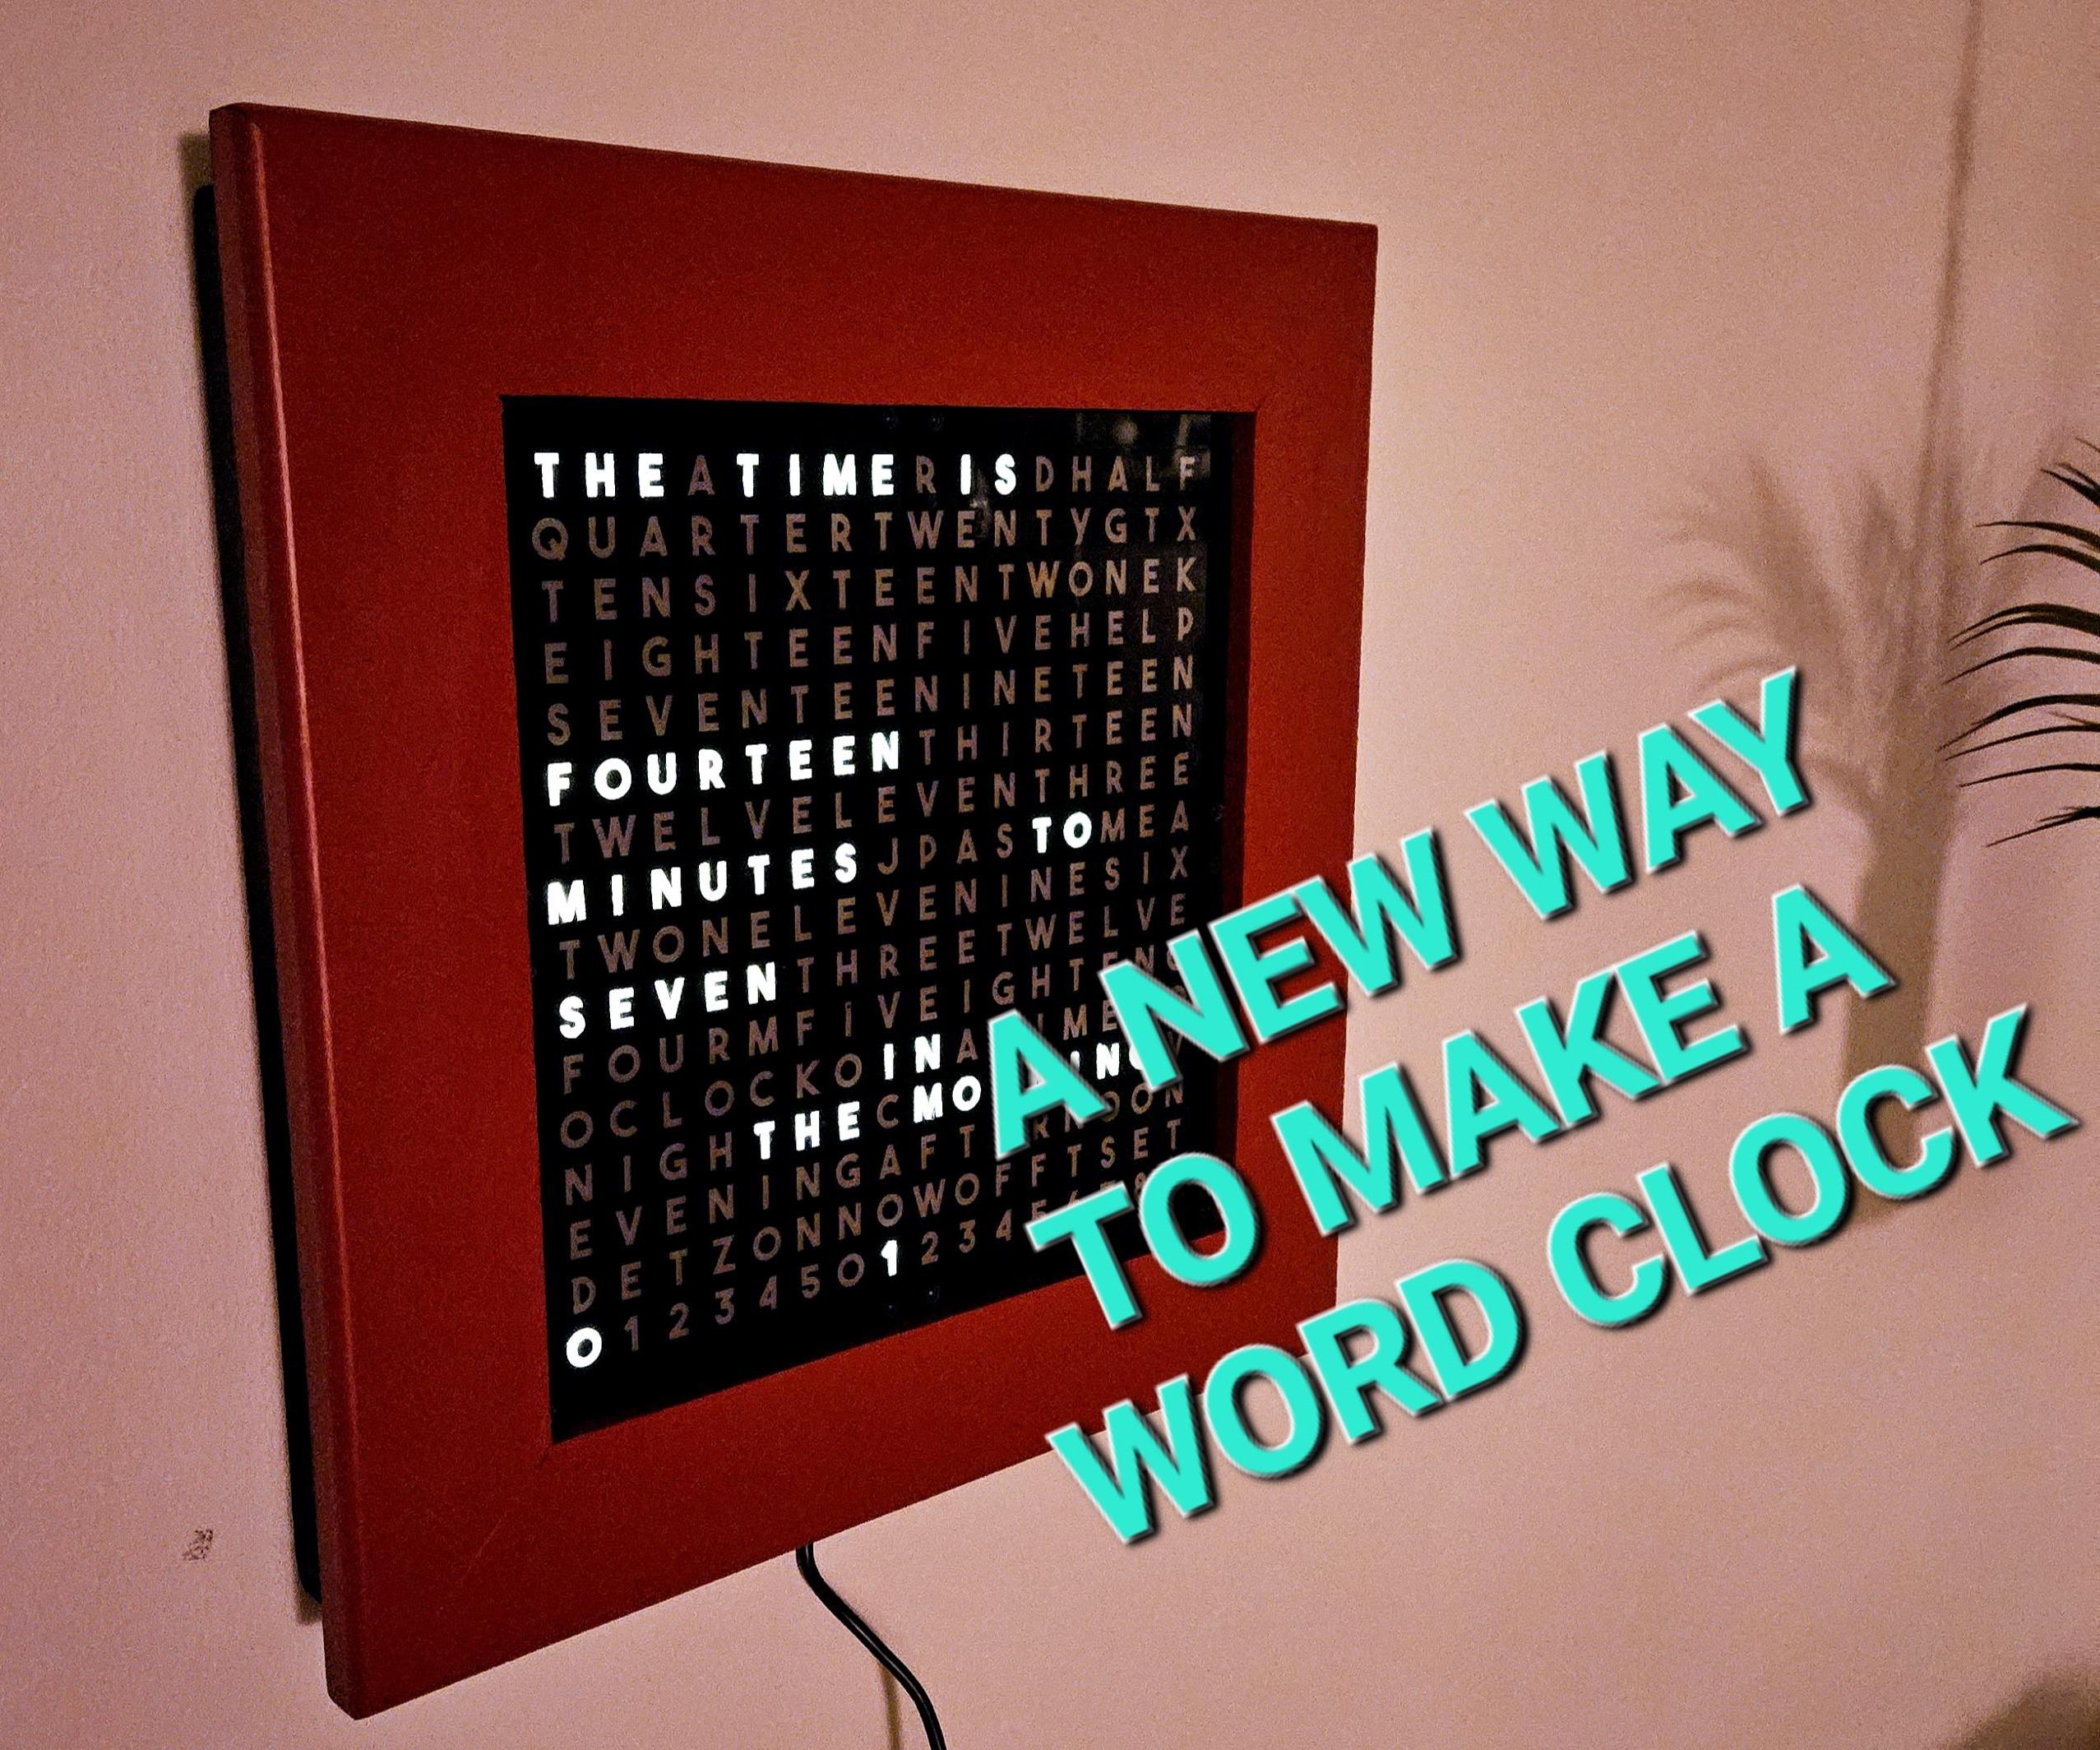 Another Word Clock, But With a Different Approach